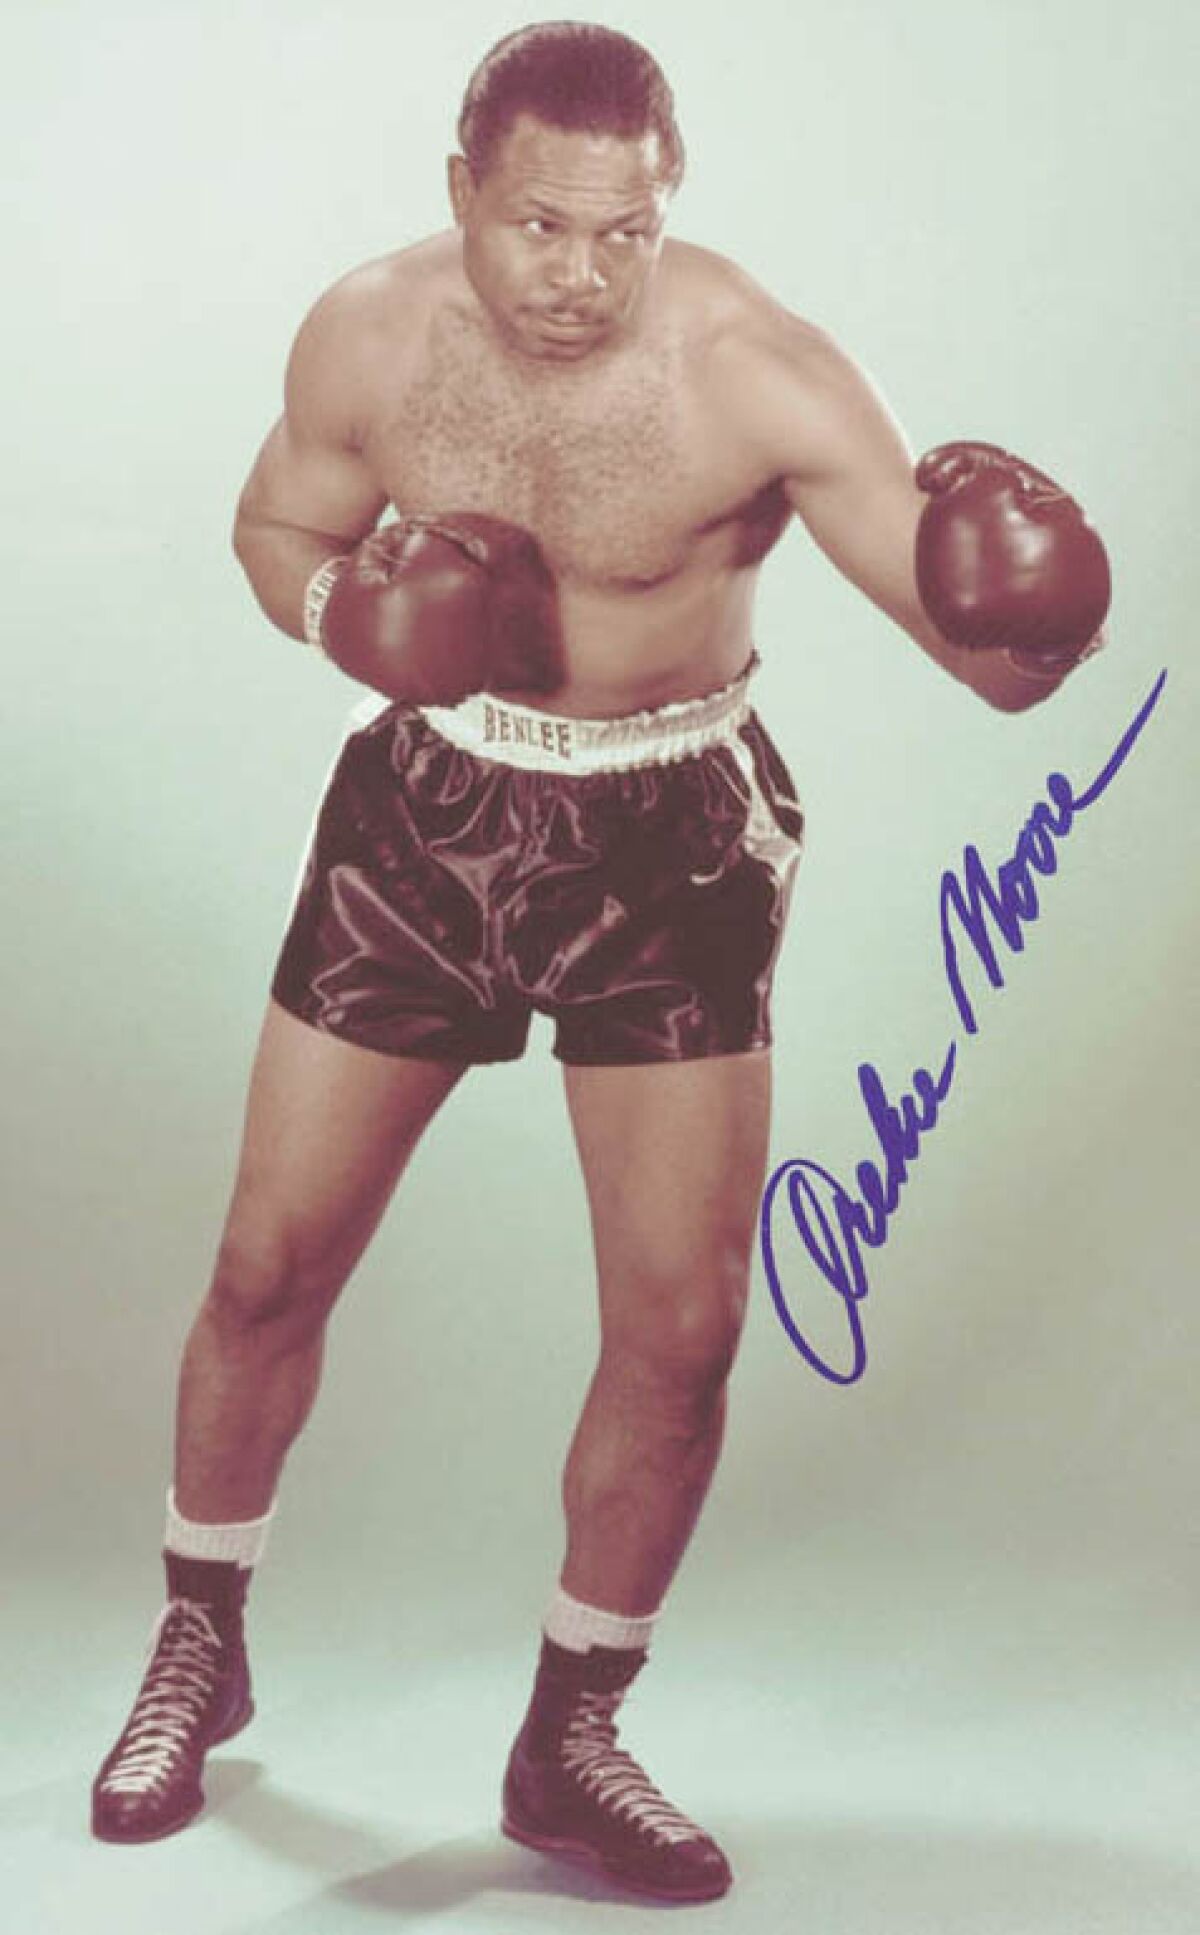 Former professional boxer Archie Moore started Any Body Can to help prevent youths from becoming involved in drugs and gangs.